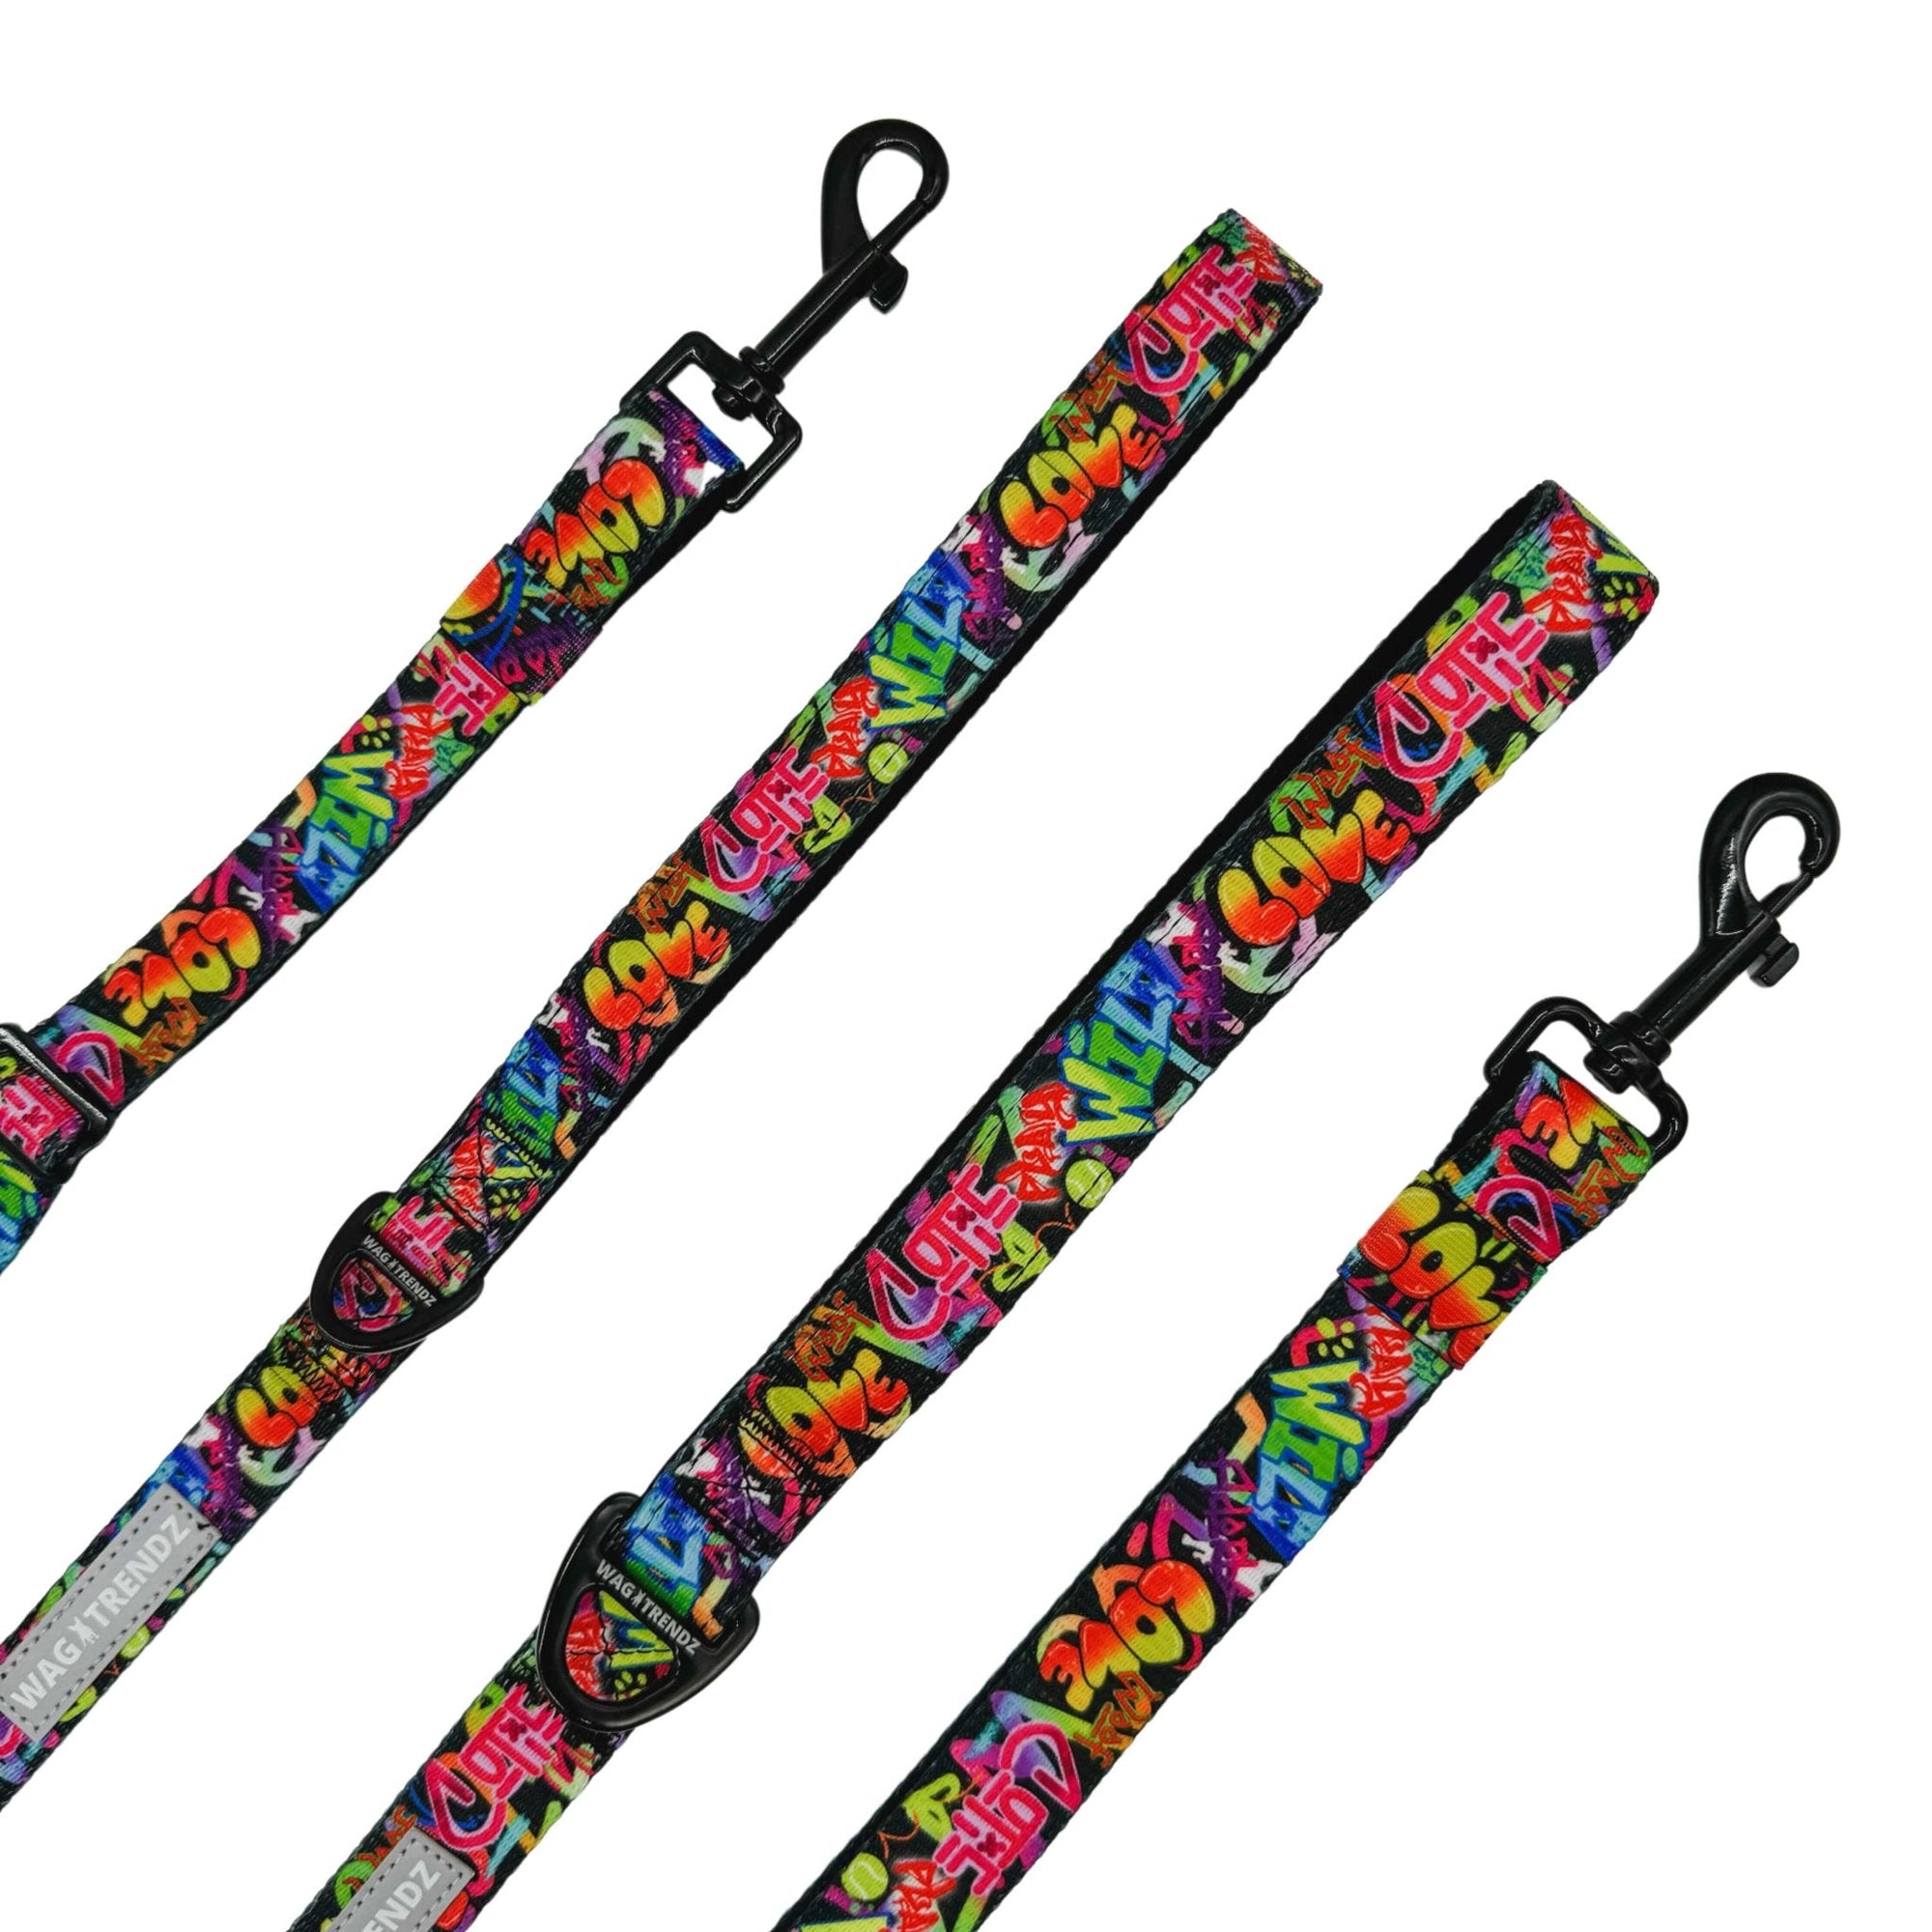 Dog Harness and Leash Set - adjustable dog leash in multi colored Street Graffiti - against solid white background - Wag Trendz